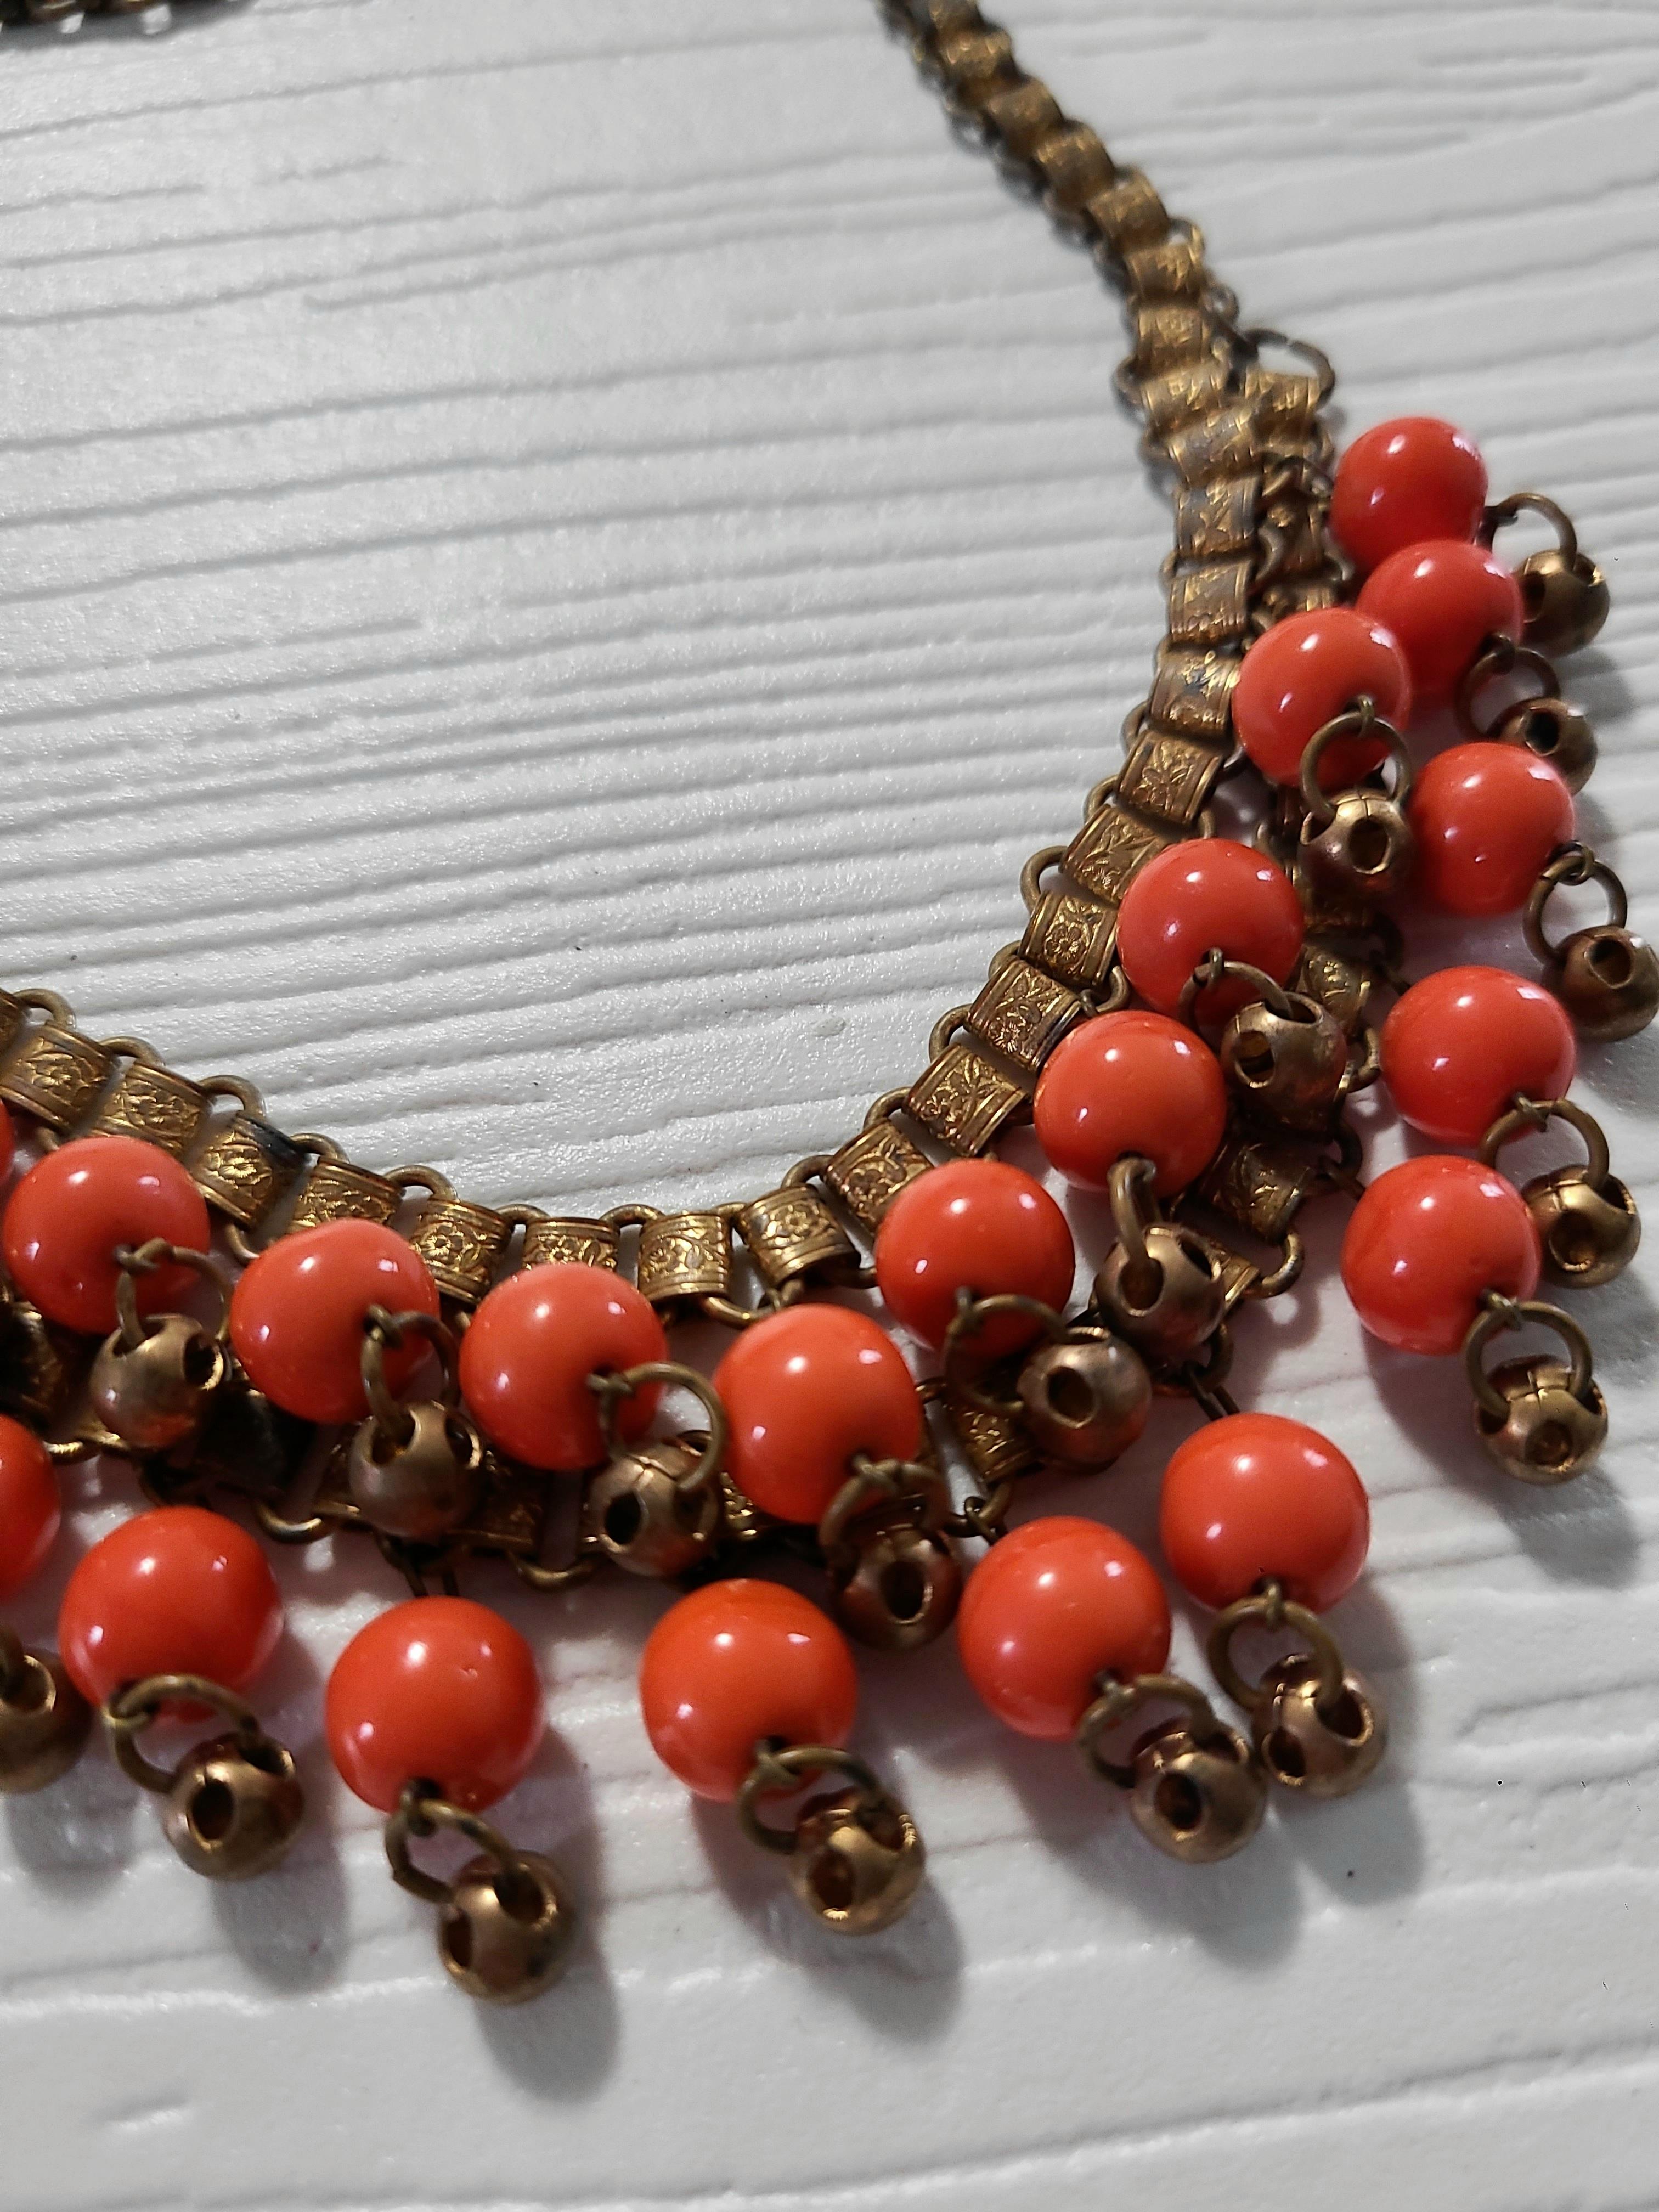 Art Deco 1930s Miriam Haskell Persimmon Dangling Bead Bib Necklace & Earring Set For Sale